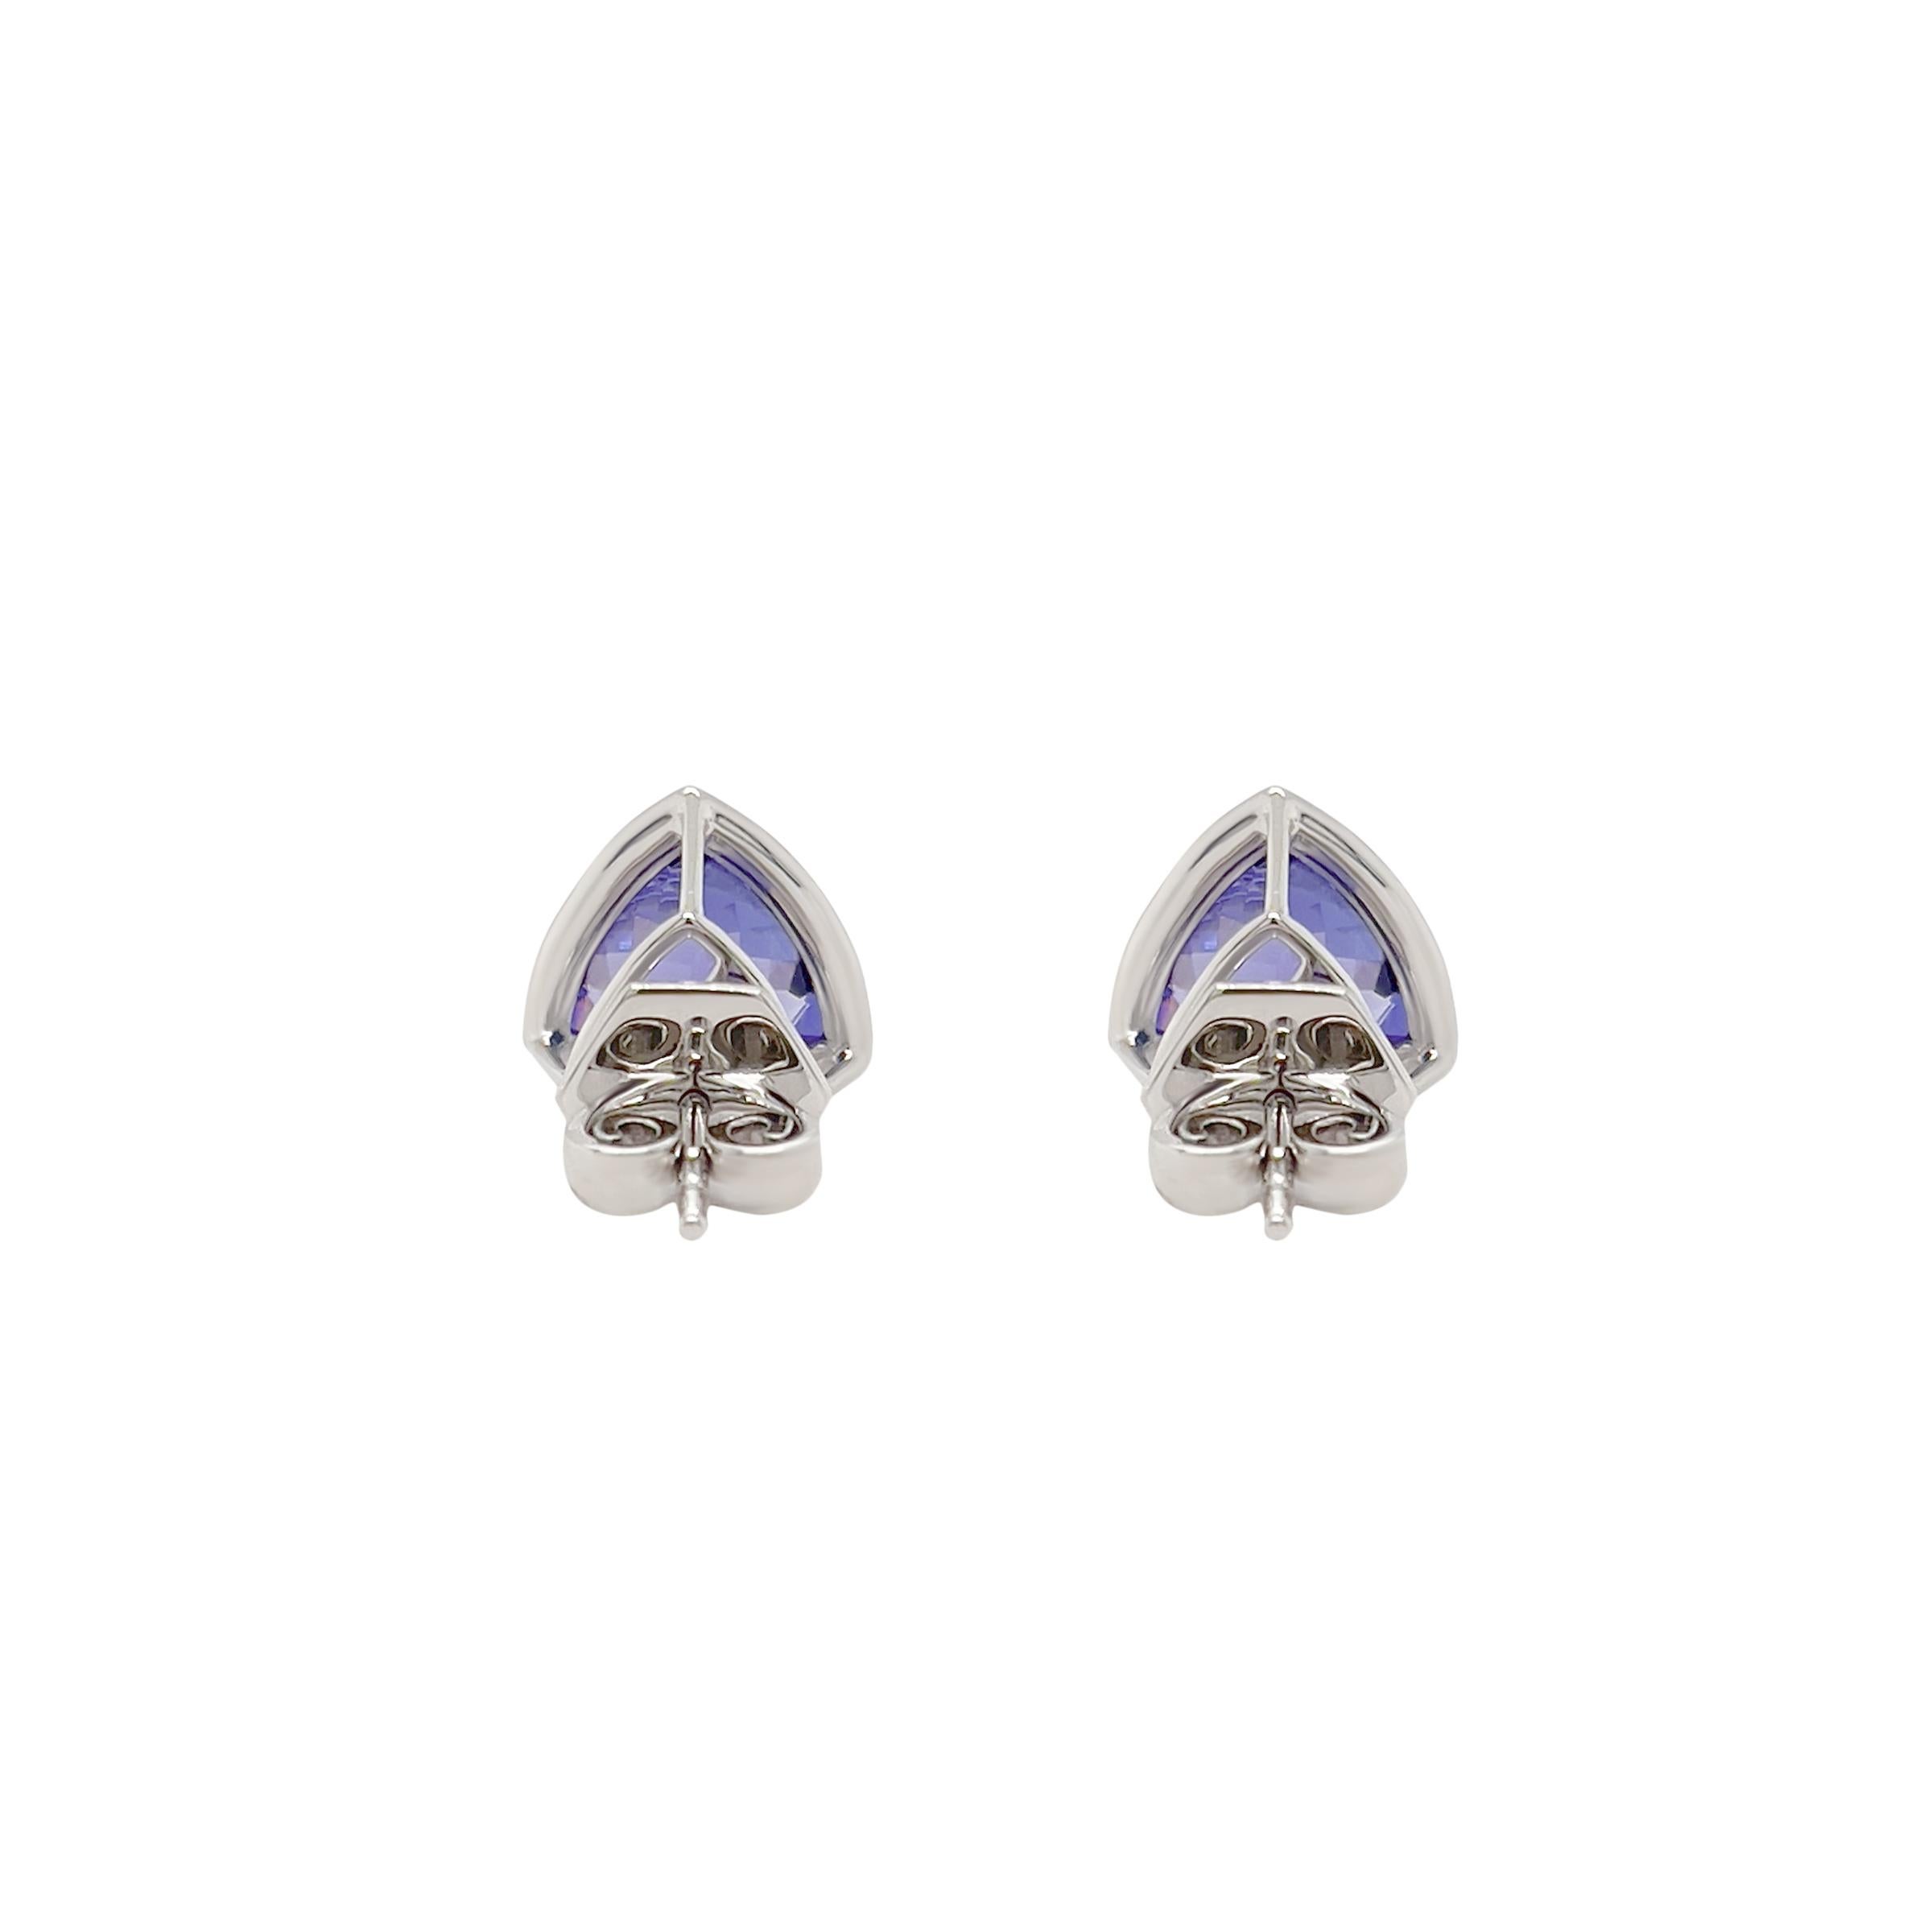 These stunning 3.61ct natural trillion cut tanzanite earrings will be sure to make a statement. The deep velvety blue hue of the tanzanite is contrasted and complemented by the crisp white brilliance of the diamond halo and luxurious 18k white gold